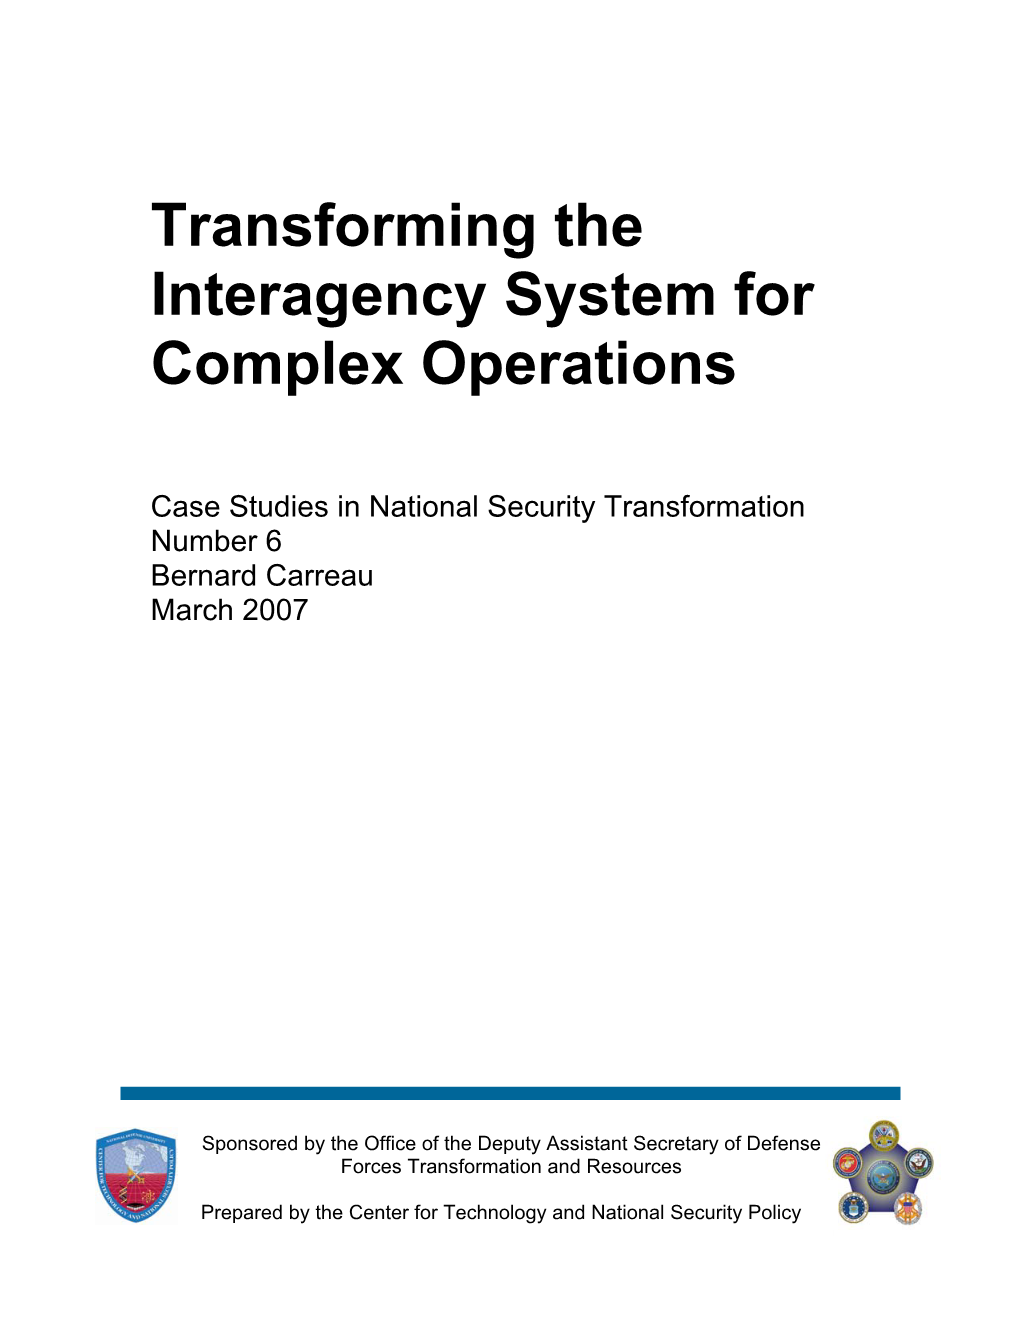 Transforming the Interagency System for Complex Operations